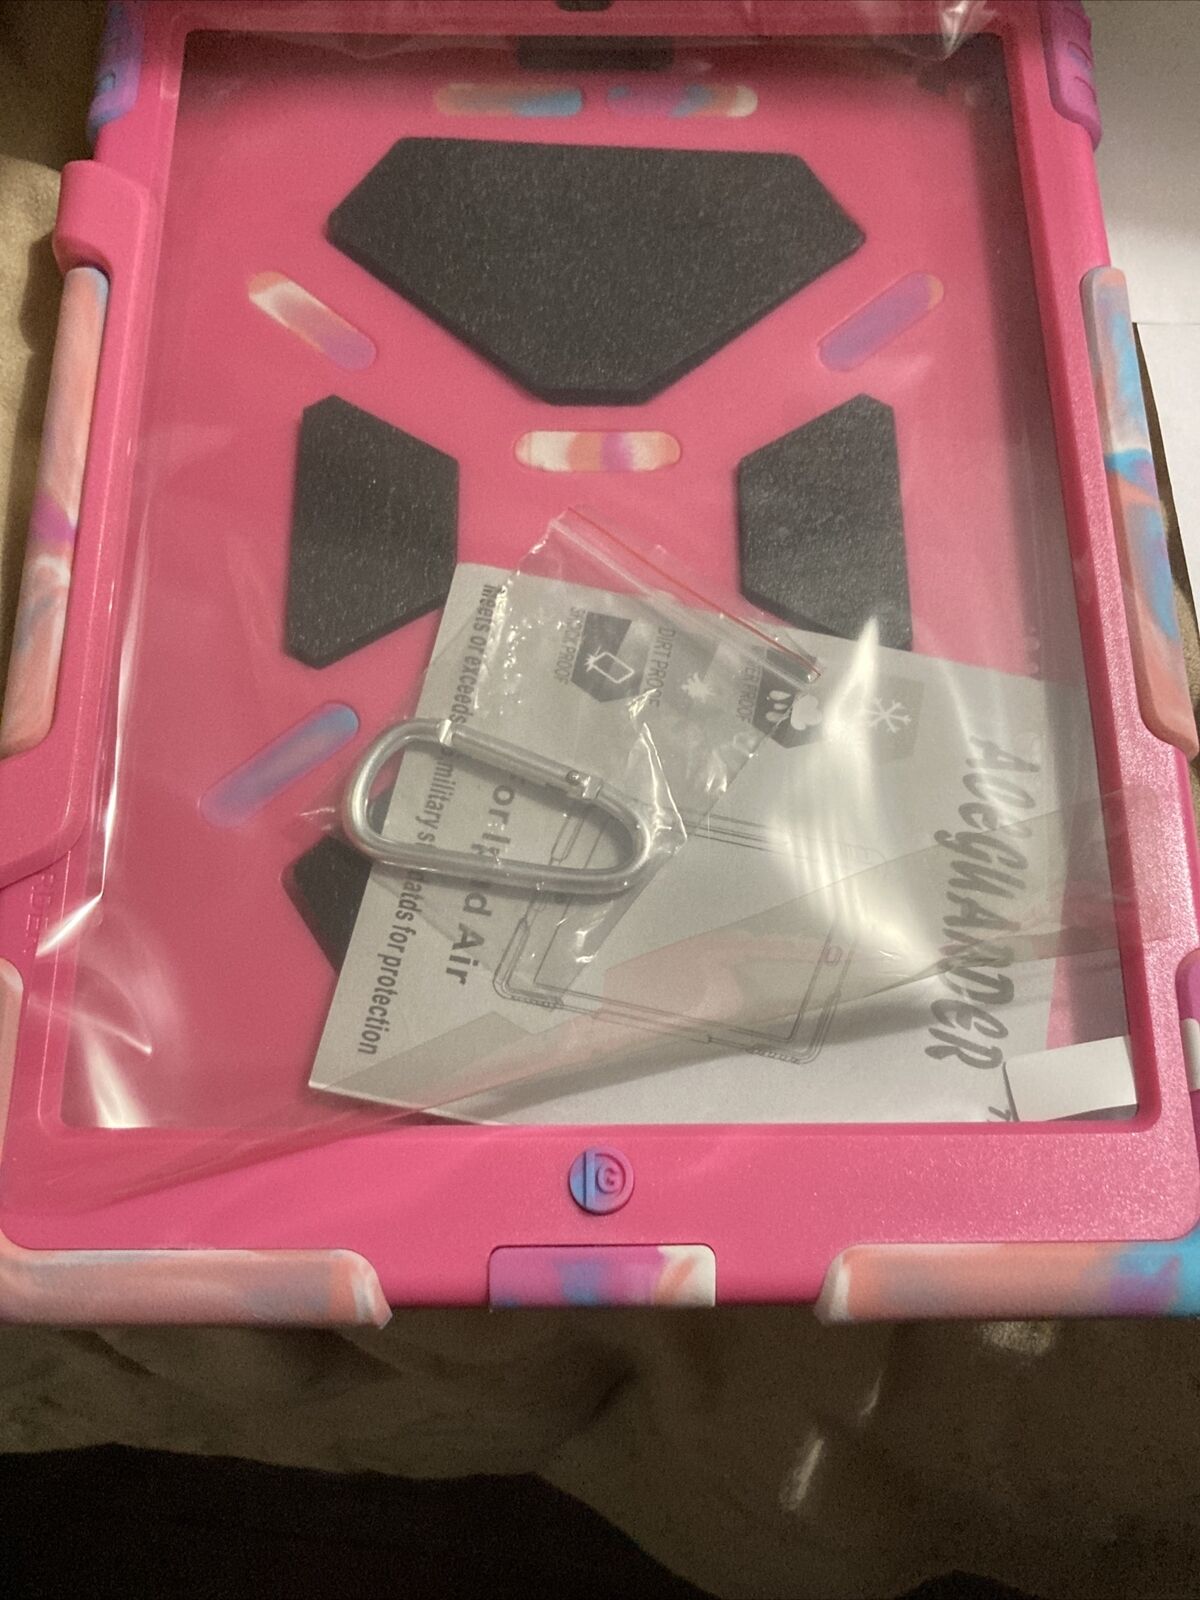 Aceguarder Military Grade Case & Stand for iPad Air Pink NIB  Plus 2 Free Gifts